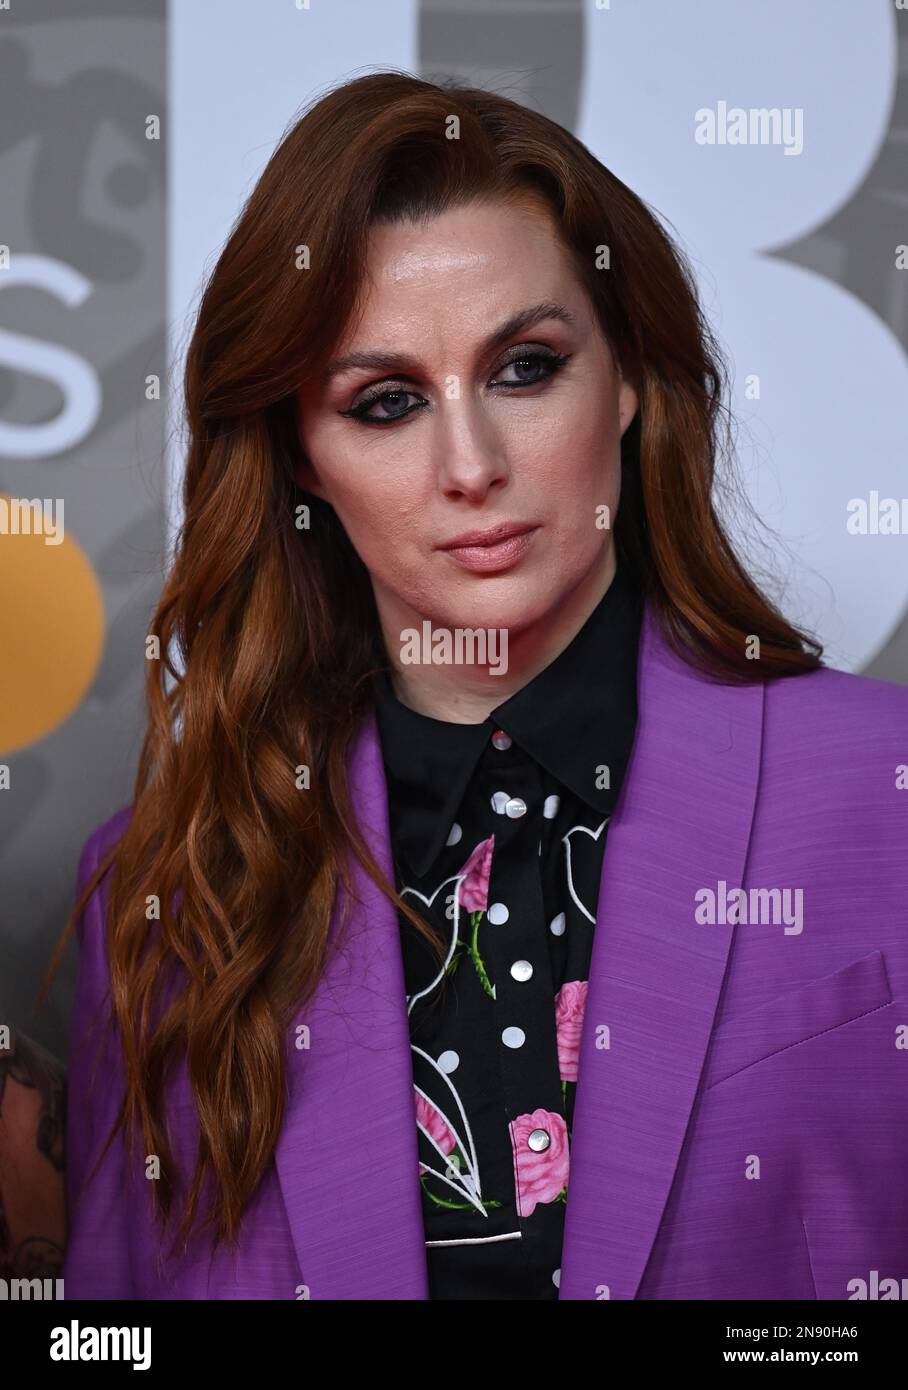 EDITORIAL USE ONLY February 11th, 2023, London, UK. Siobhan Donaghy from the Sugababes arriving at The BRIT Awards 2023, O2 Arena, London. Credit: Doug Peters/EMPICS/Alamy Live News Stock Photo